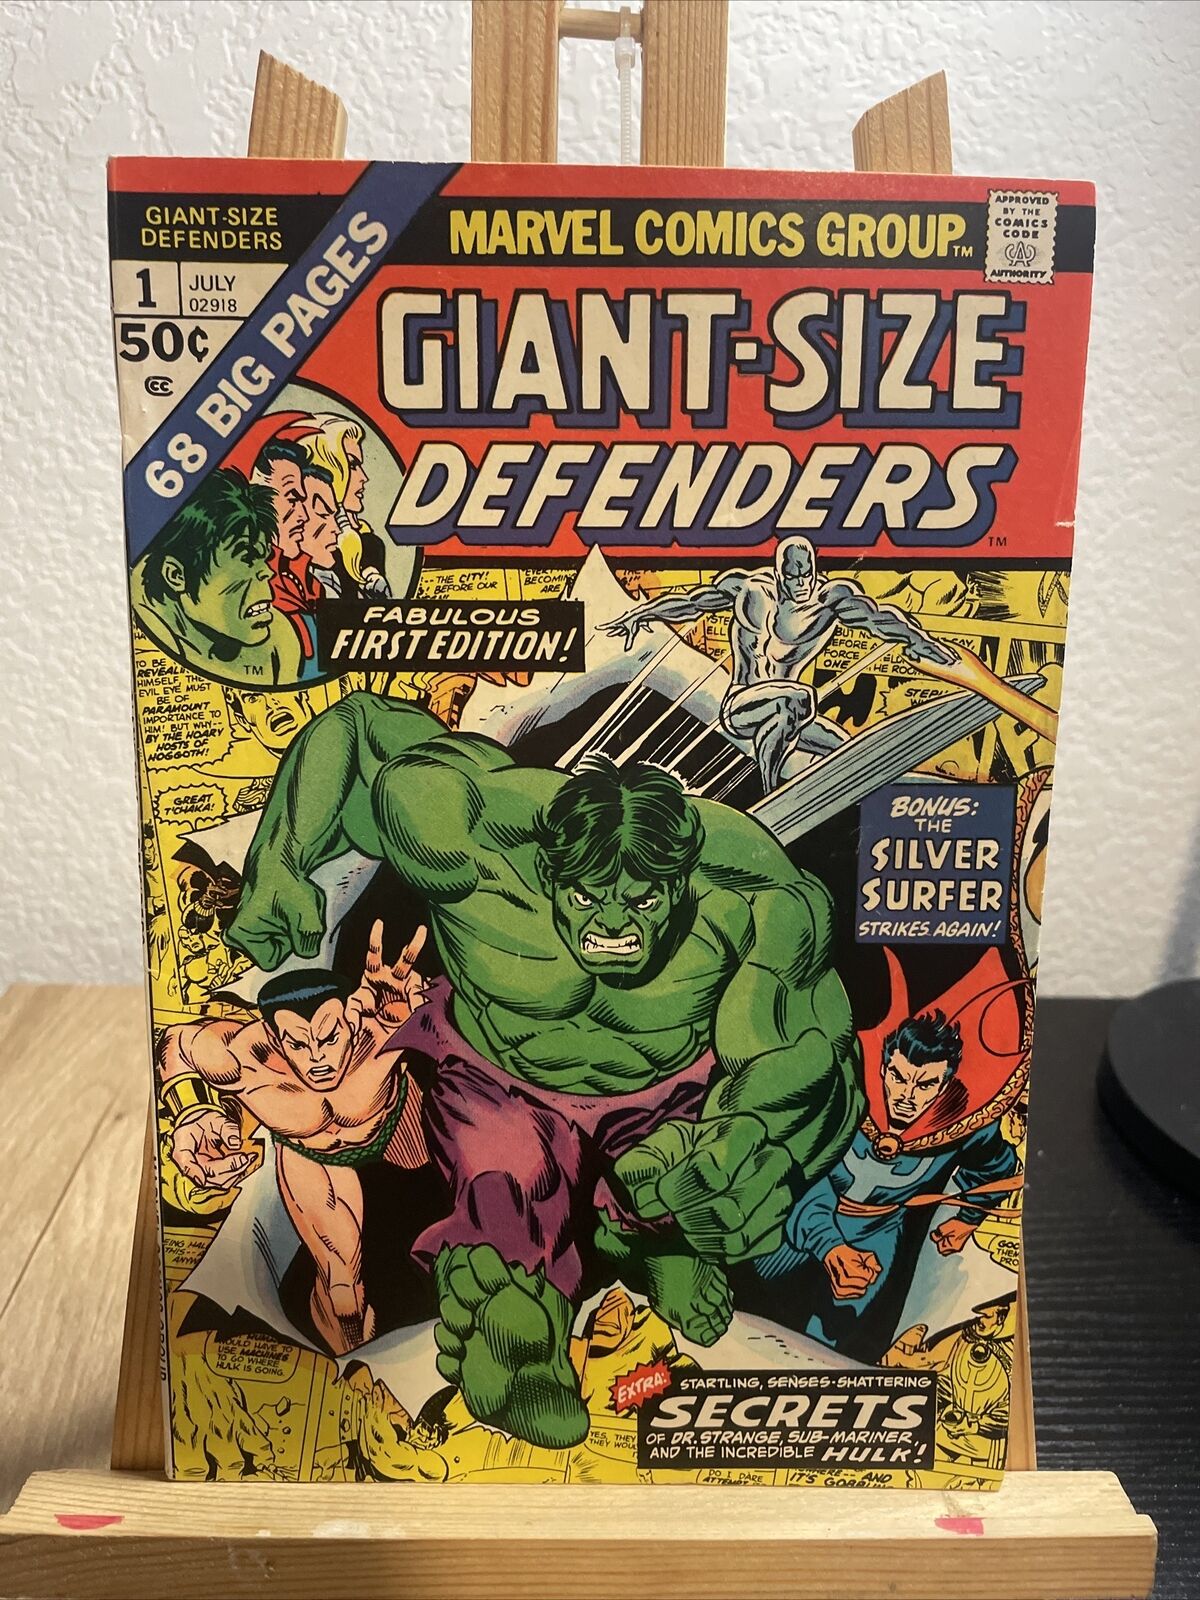 Giant-Size Defenders #1 1974